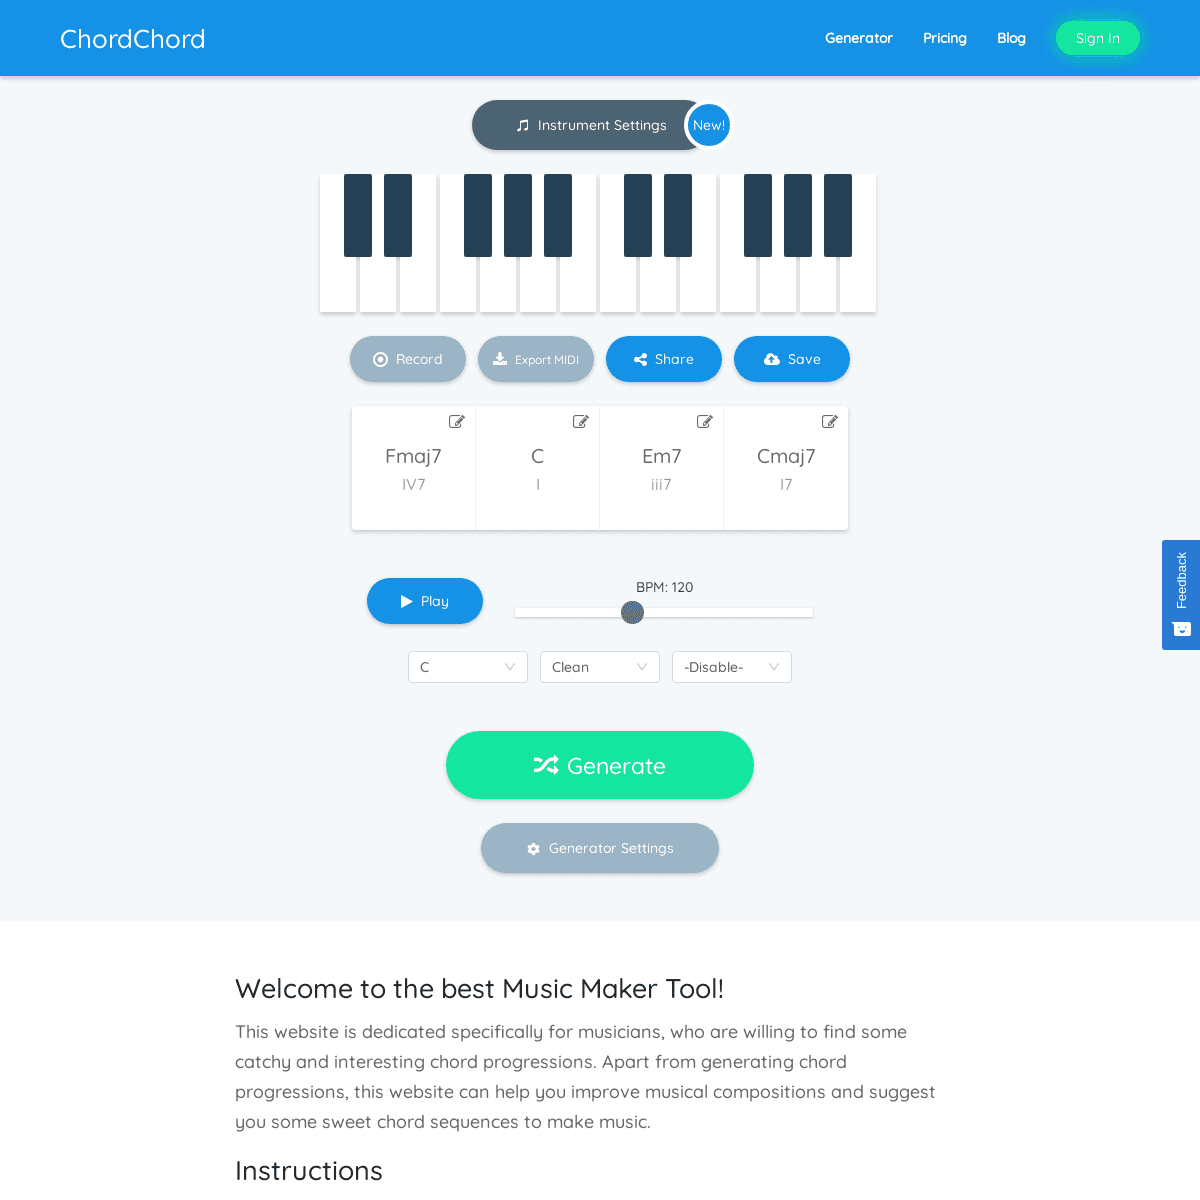 A complete backup of chordchord.com